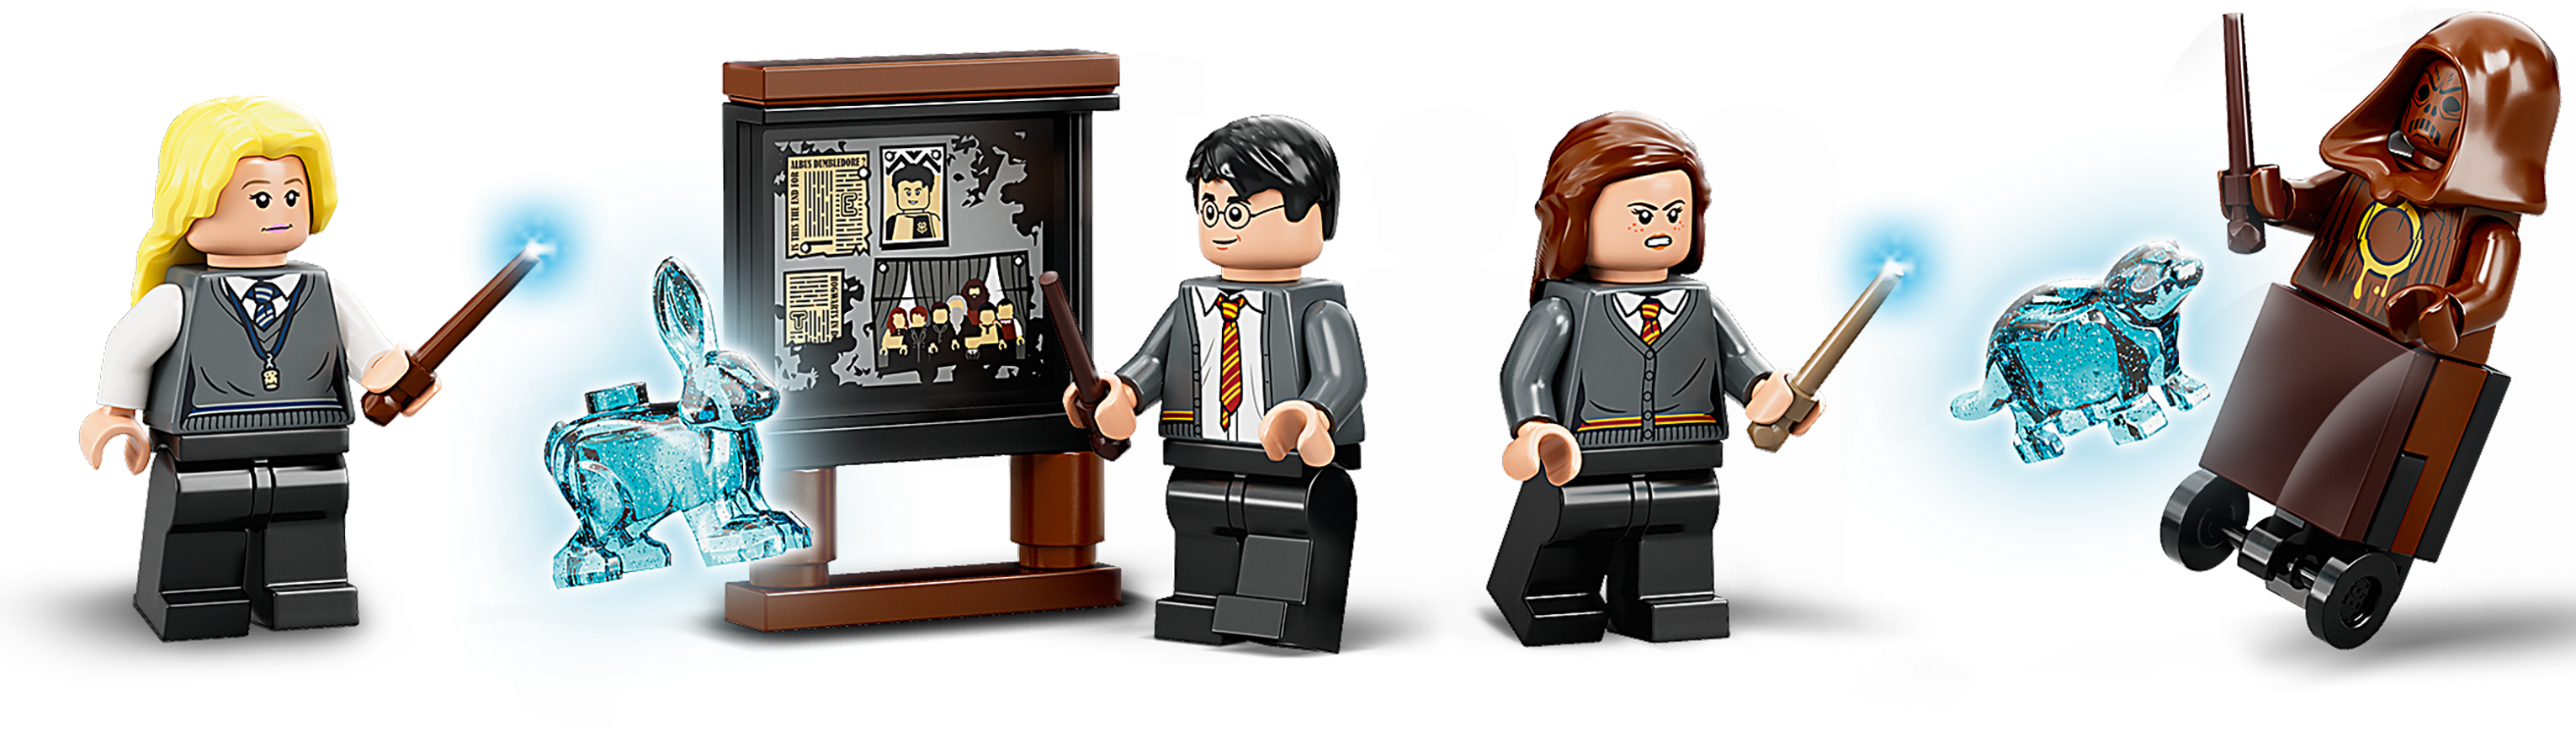 LEGO Harry Potter Hogwarts: Room of Requirement